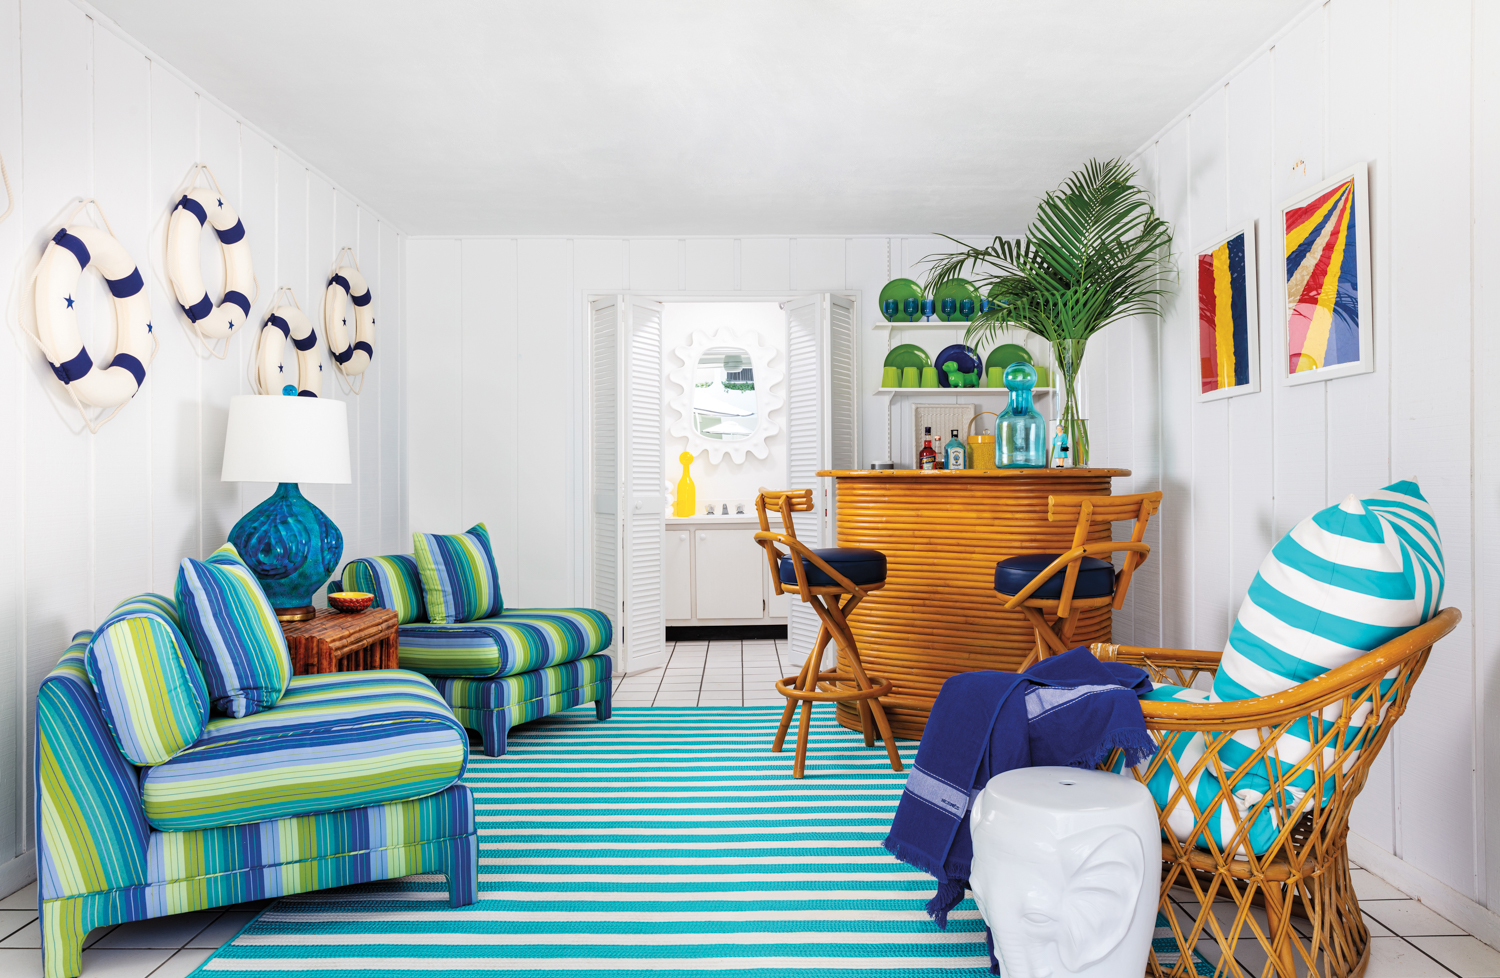 cabana with wicker bar and stools, blue striped rug and striped armchairs